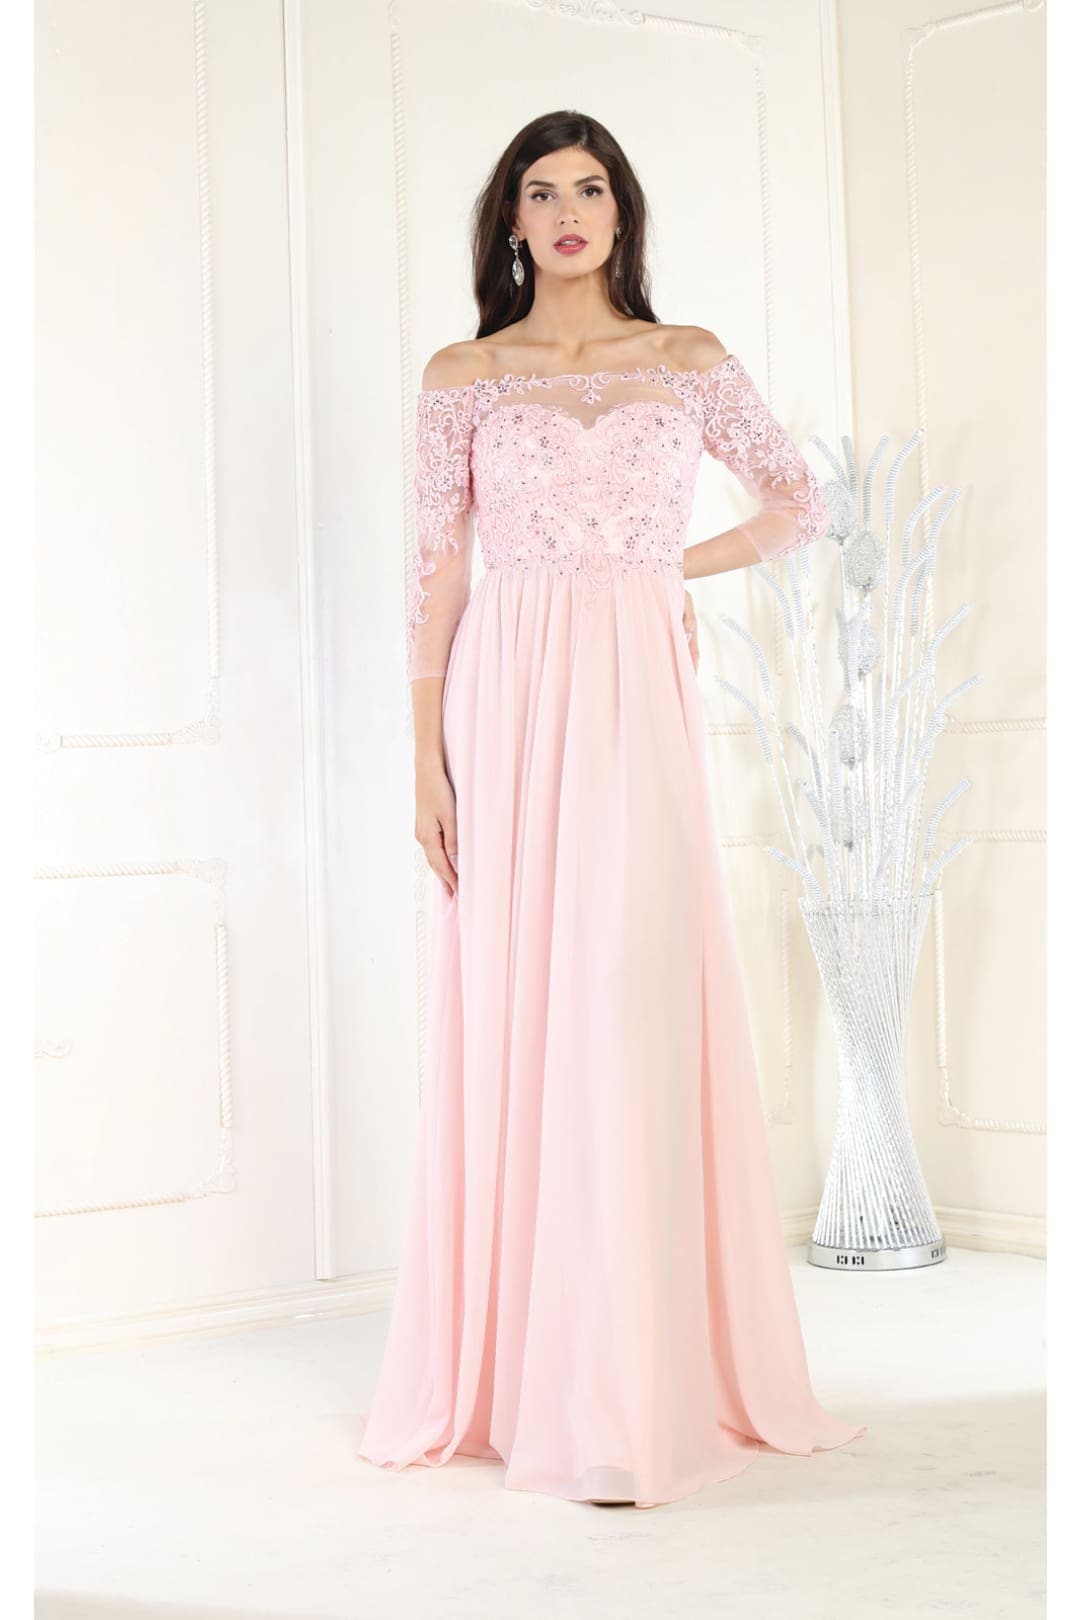 May Queen MQ1853 Off Shoulder Embroidered Plus Size Formal Gown - DUSTY ROSE / 6